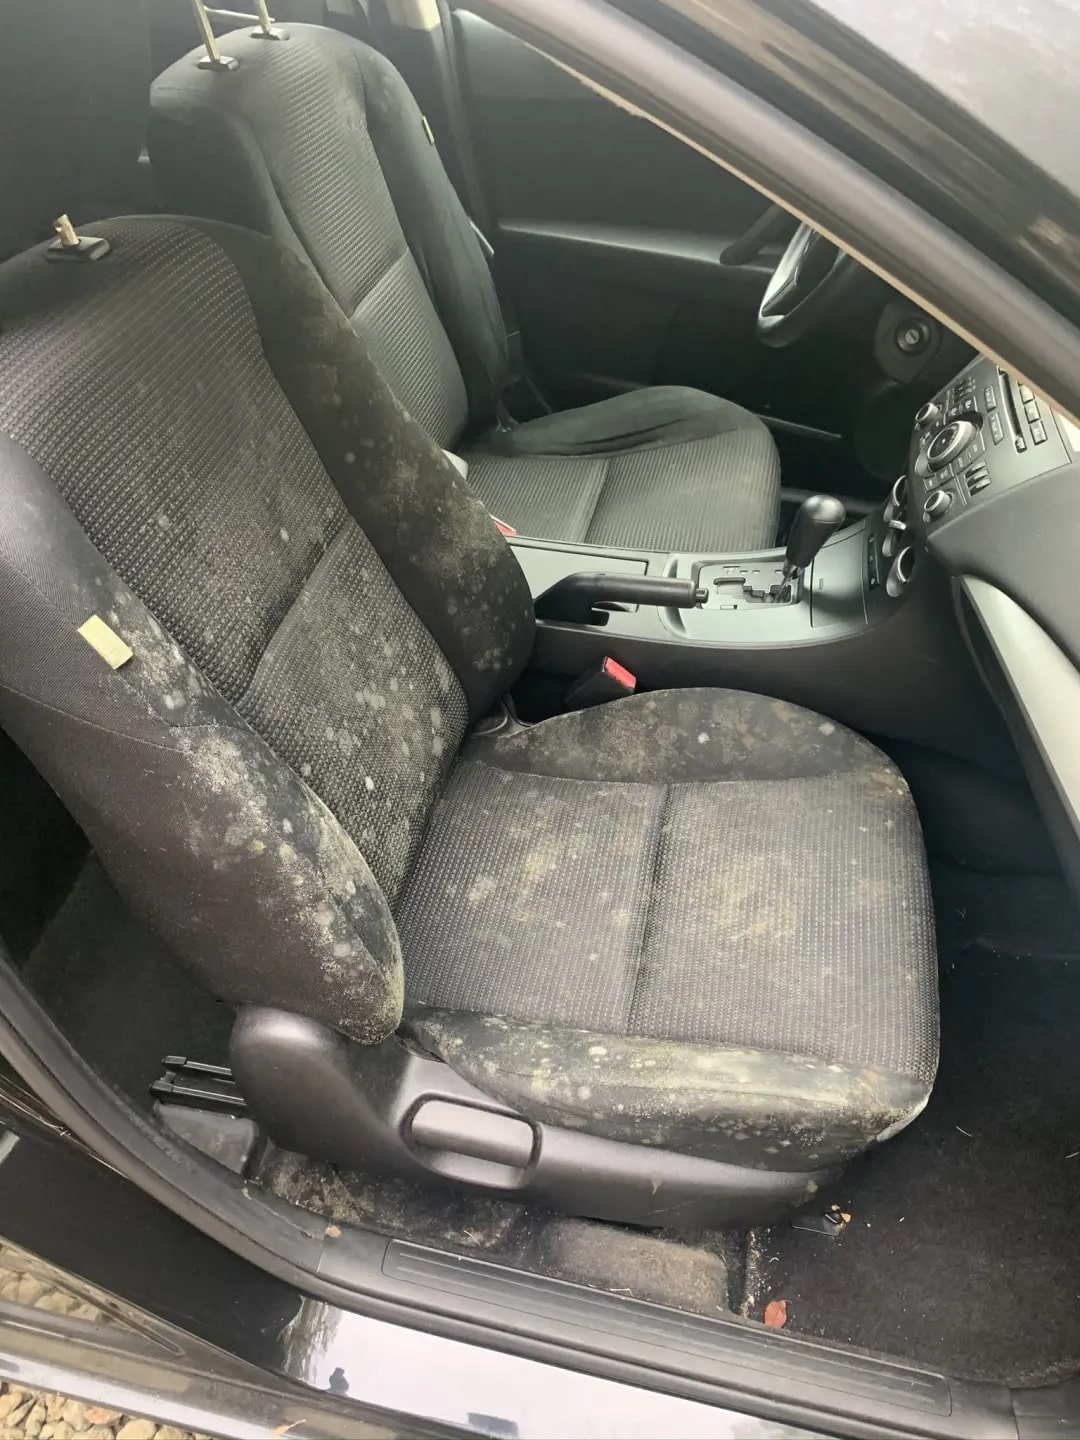 Car mold removal